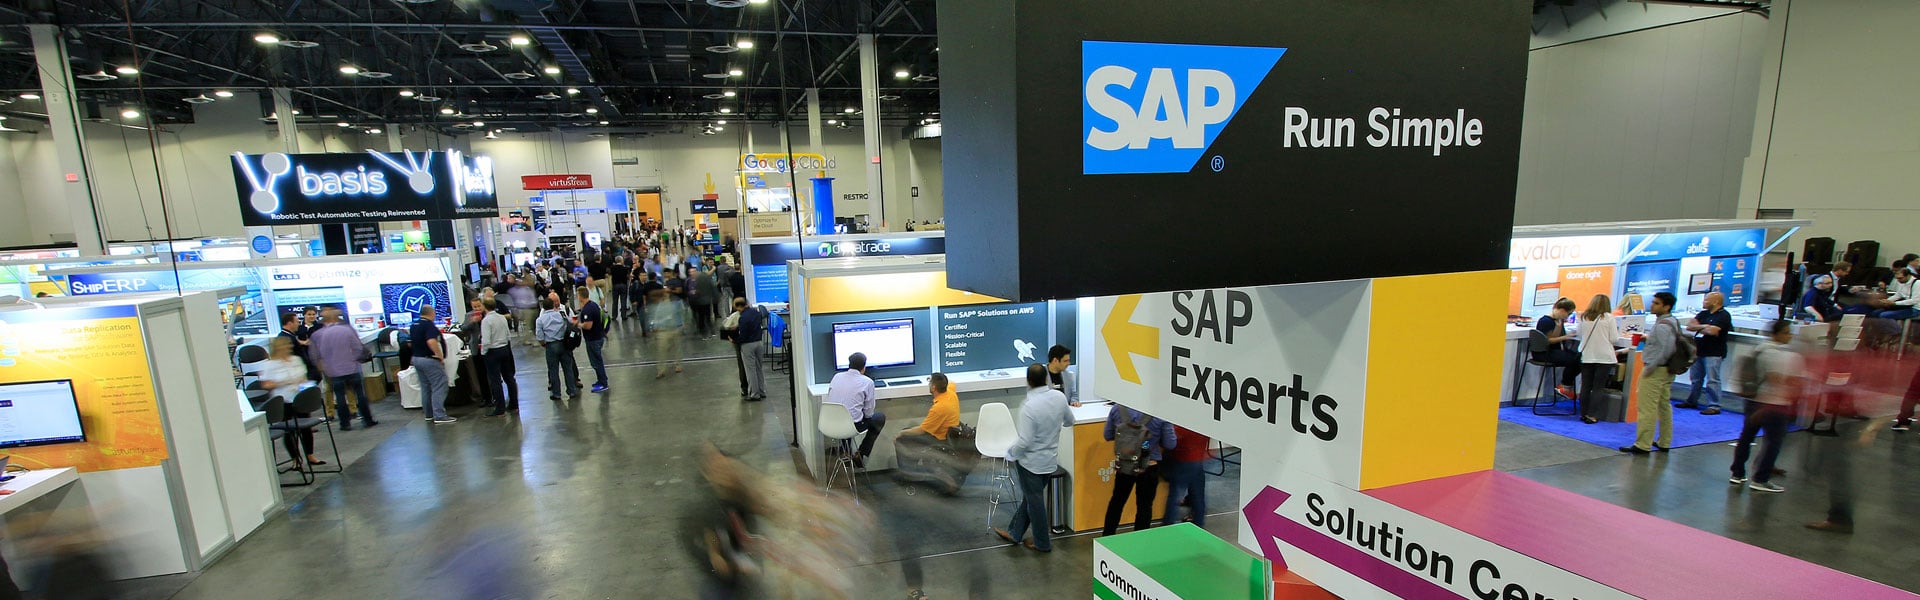 SAP TechEd 2018: Register for this Year’s Ultimate How-to Learning Adventure